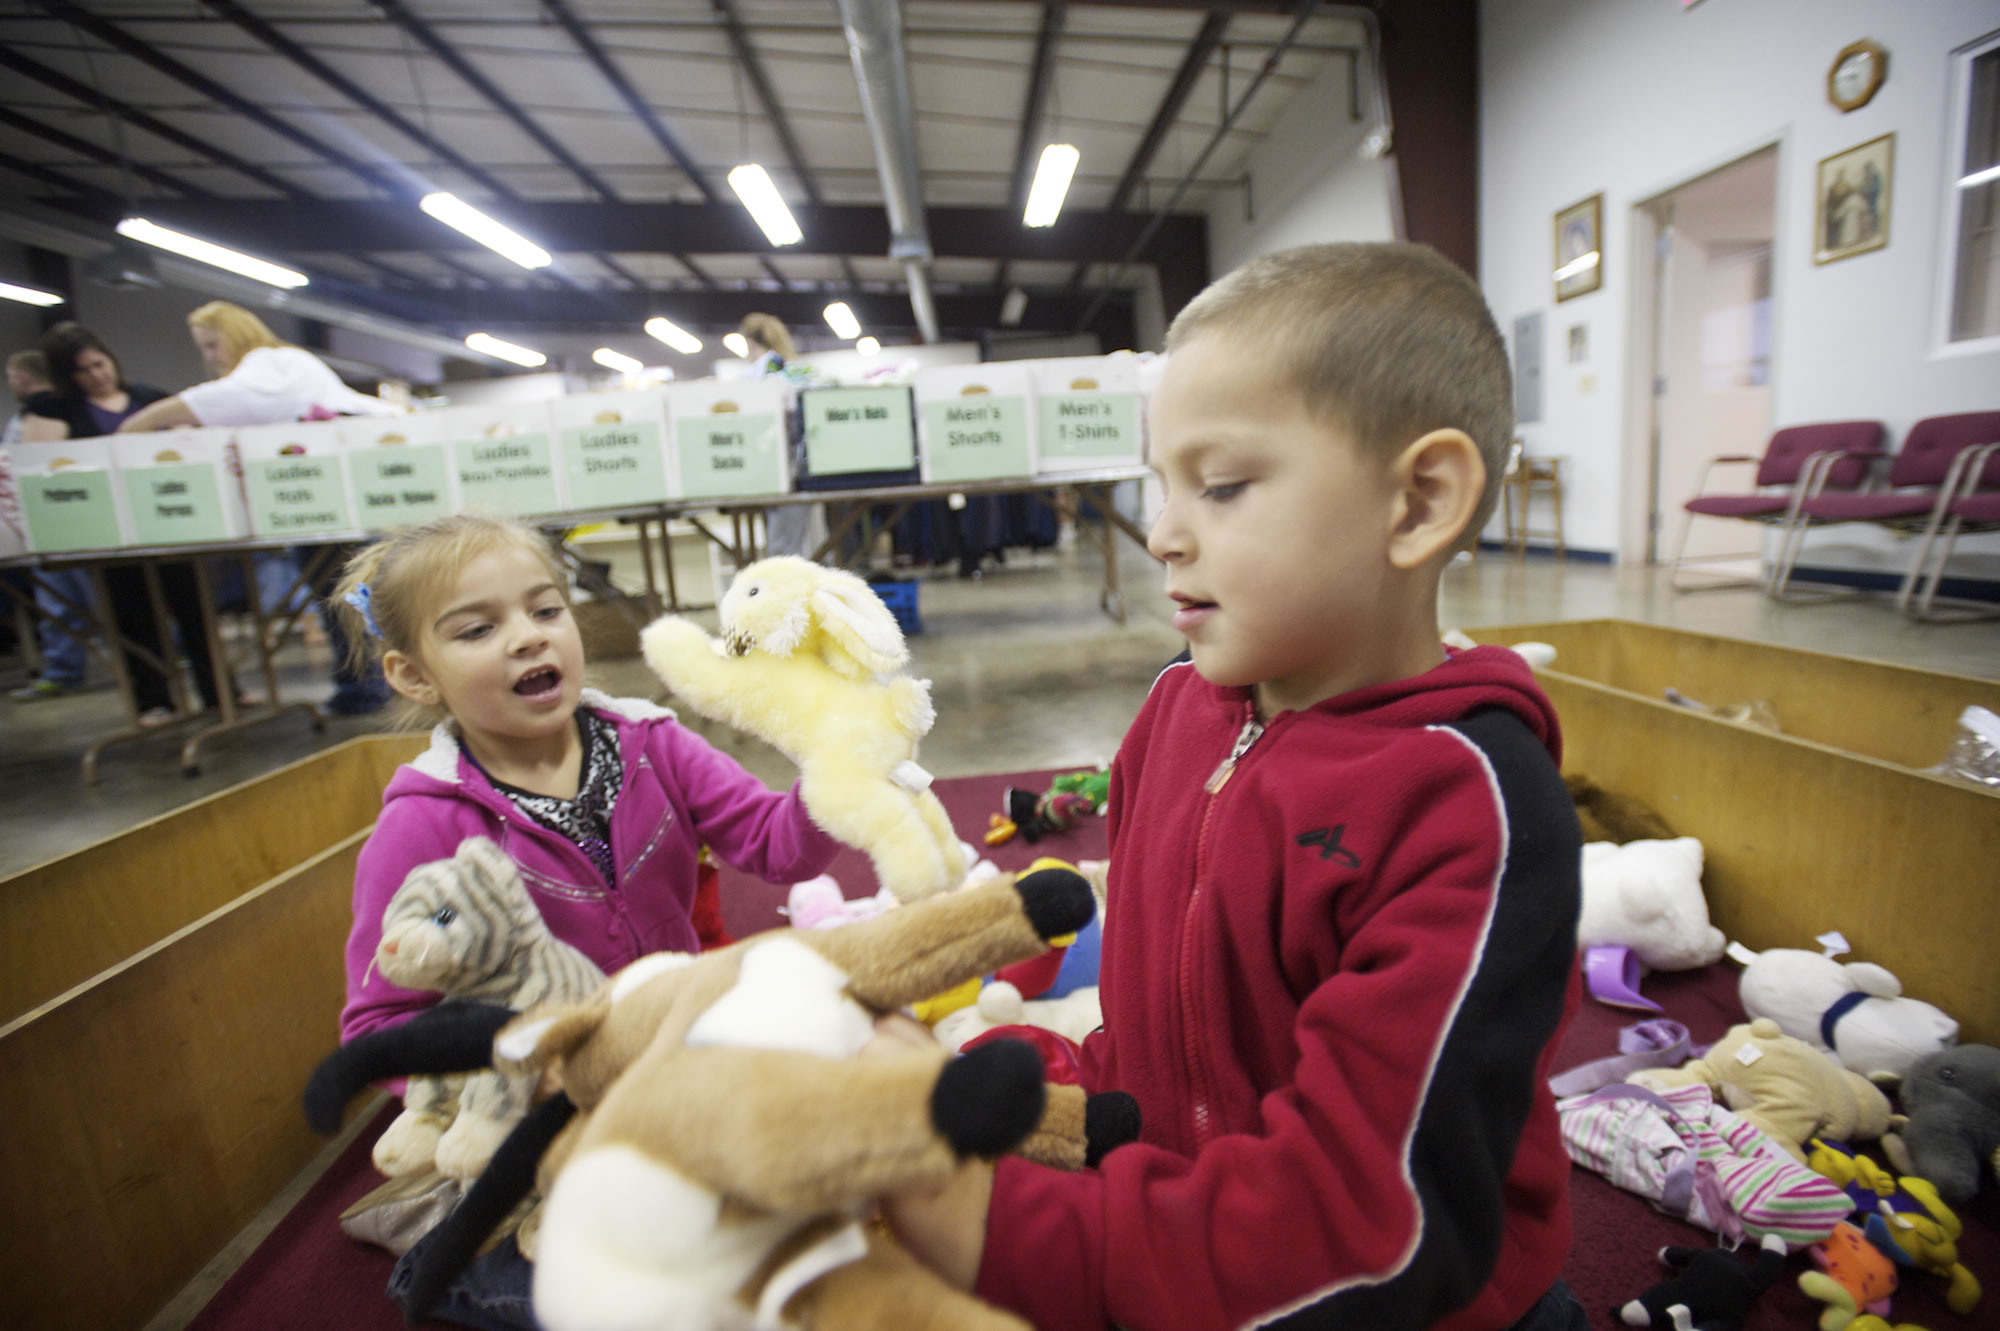 Emilia, 5, and Chico, 4, play with stuffed animals as their mom, Jessica Fraly, looks for school clothing at the St. Vincent de Paul food and clothing bank.